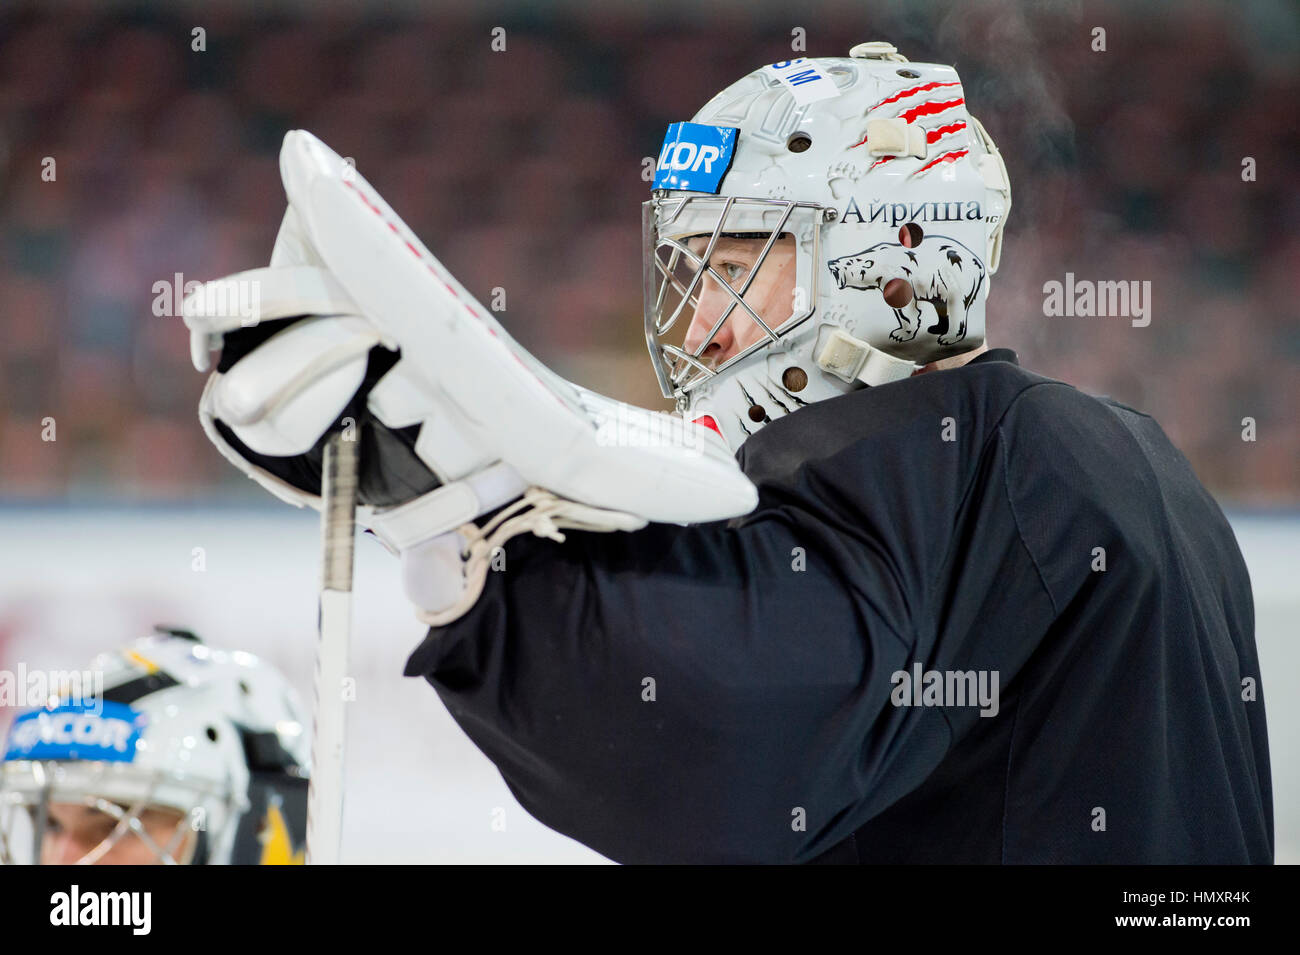 Prague, Czech Republic. 07th Feb, 2017. The Czech national ice-hockey team's player goalie Pavel Francouz in action during the training session prior to the February Sweden Games in Gothenburg in Prague, Czech Republic, February 7, 2017. Sweden Games, the third part of the European Hockey Tour (EHT) series, will take place on February 9-12. Credit: Vit Simanek/CTK Photo/Alamy Live News Stock Photo